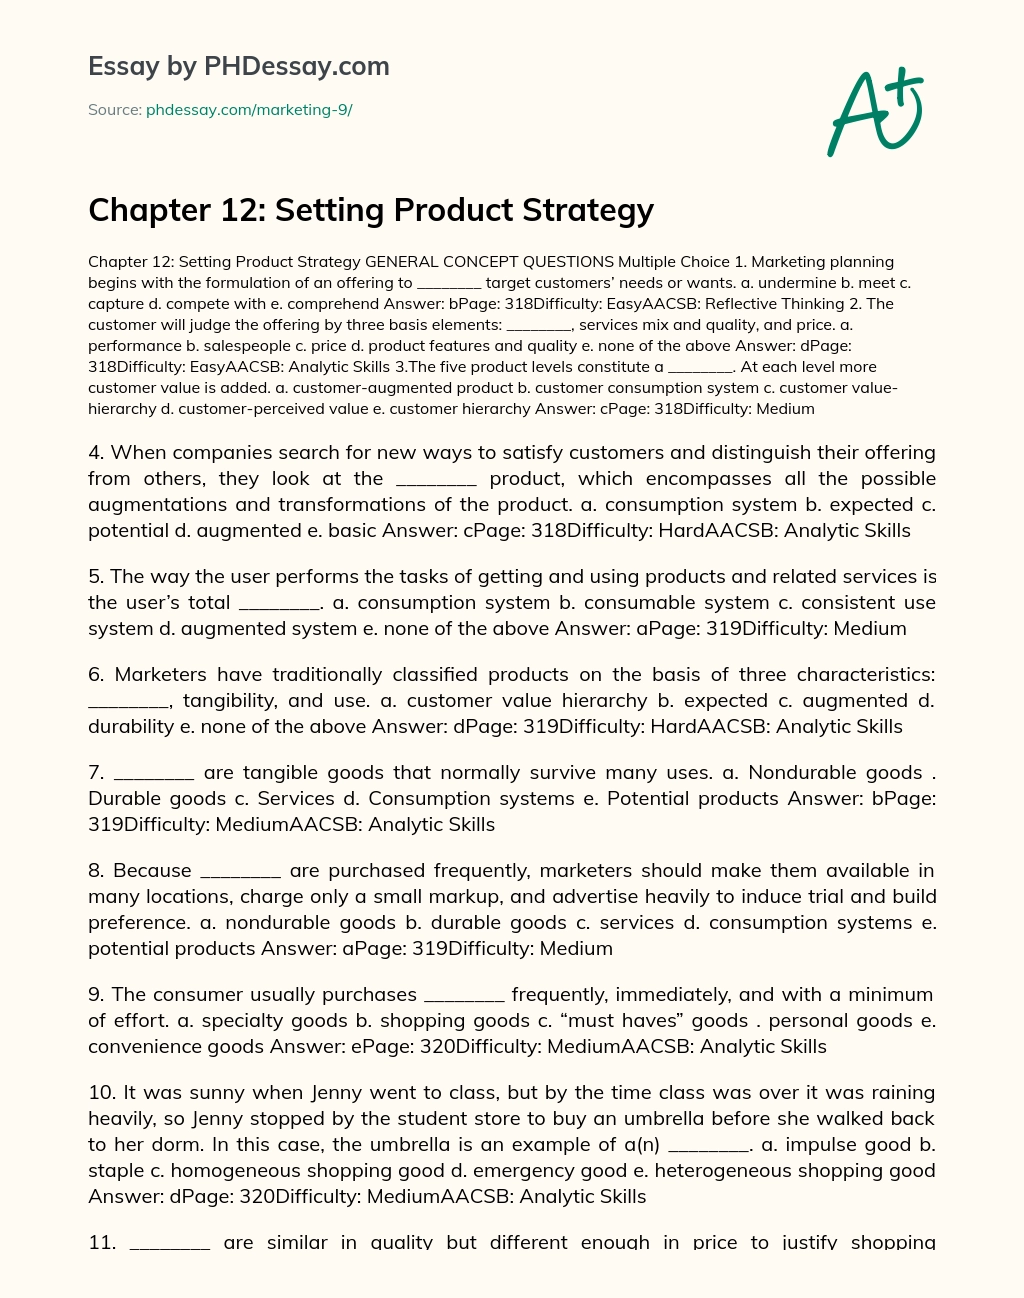 Chapter 12: Setting Product Strategy essay